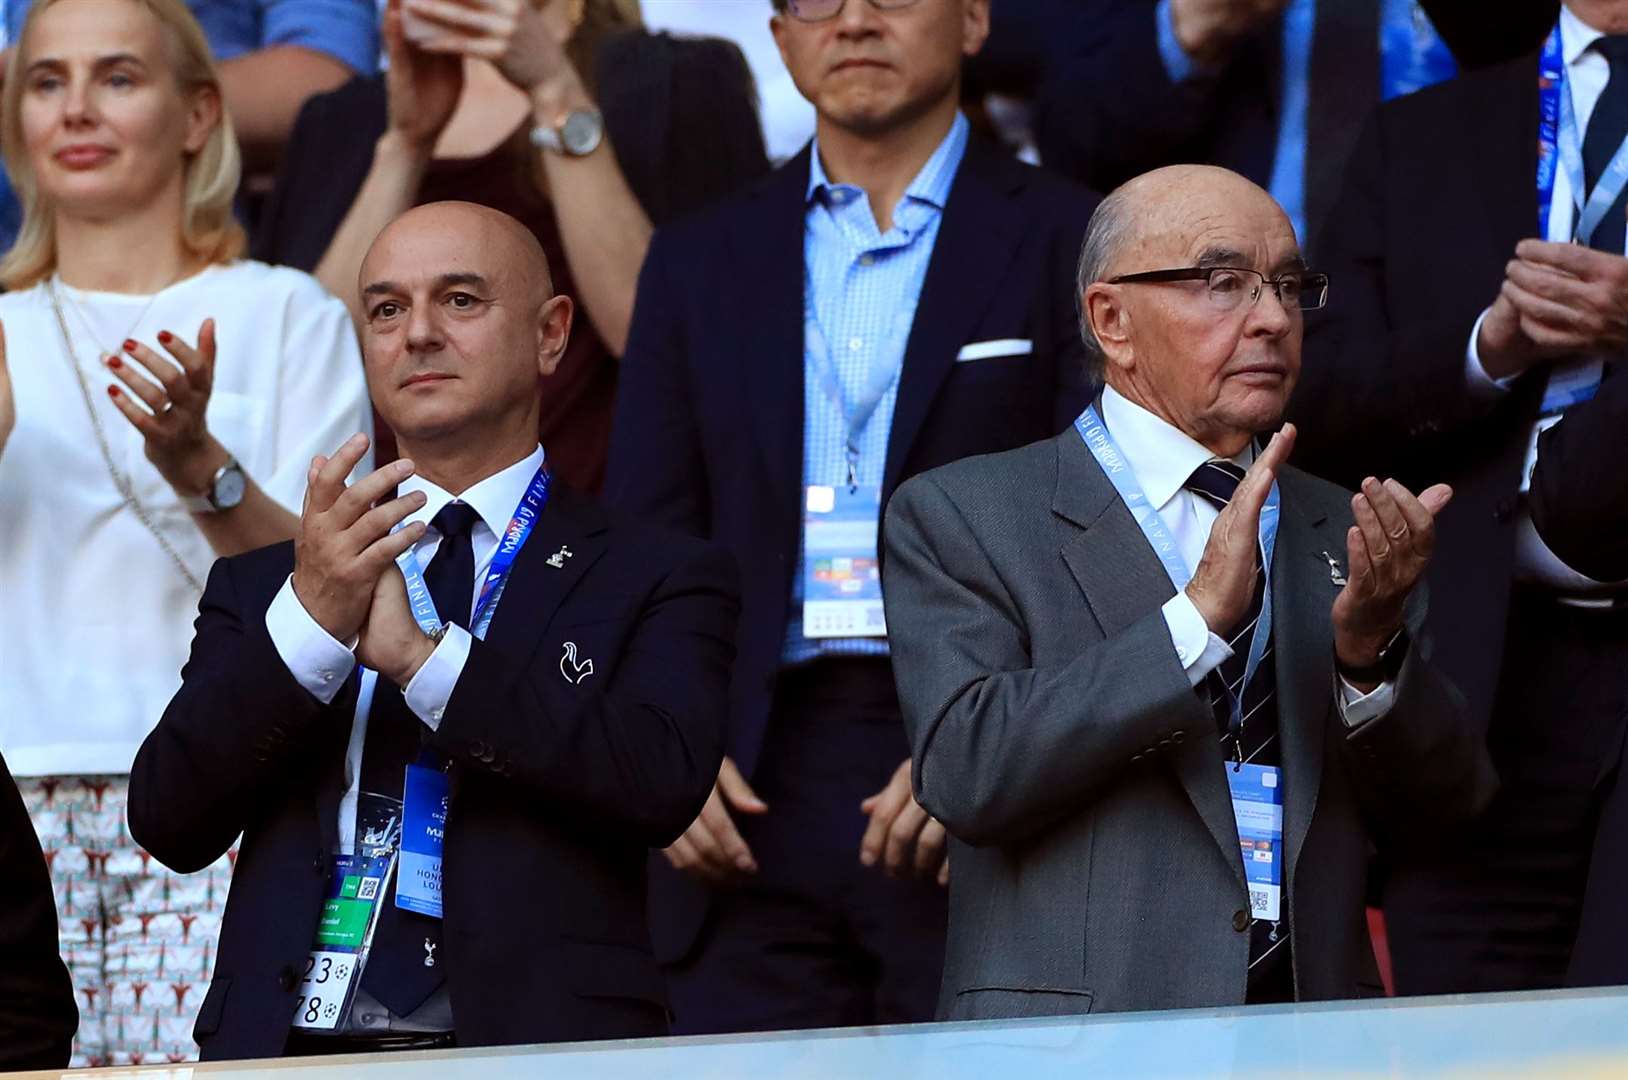 Tottenham Hotspur owner Joe Lewis (right) applauds in the stands with chairman Daniel Levy (left) (PA)